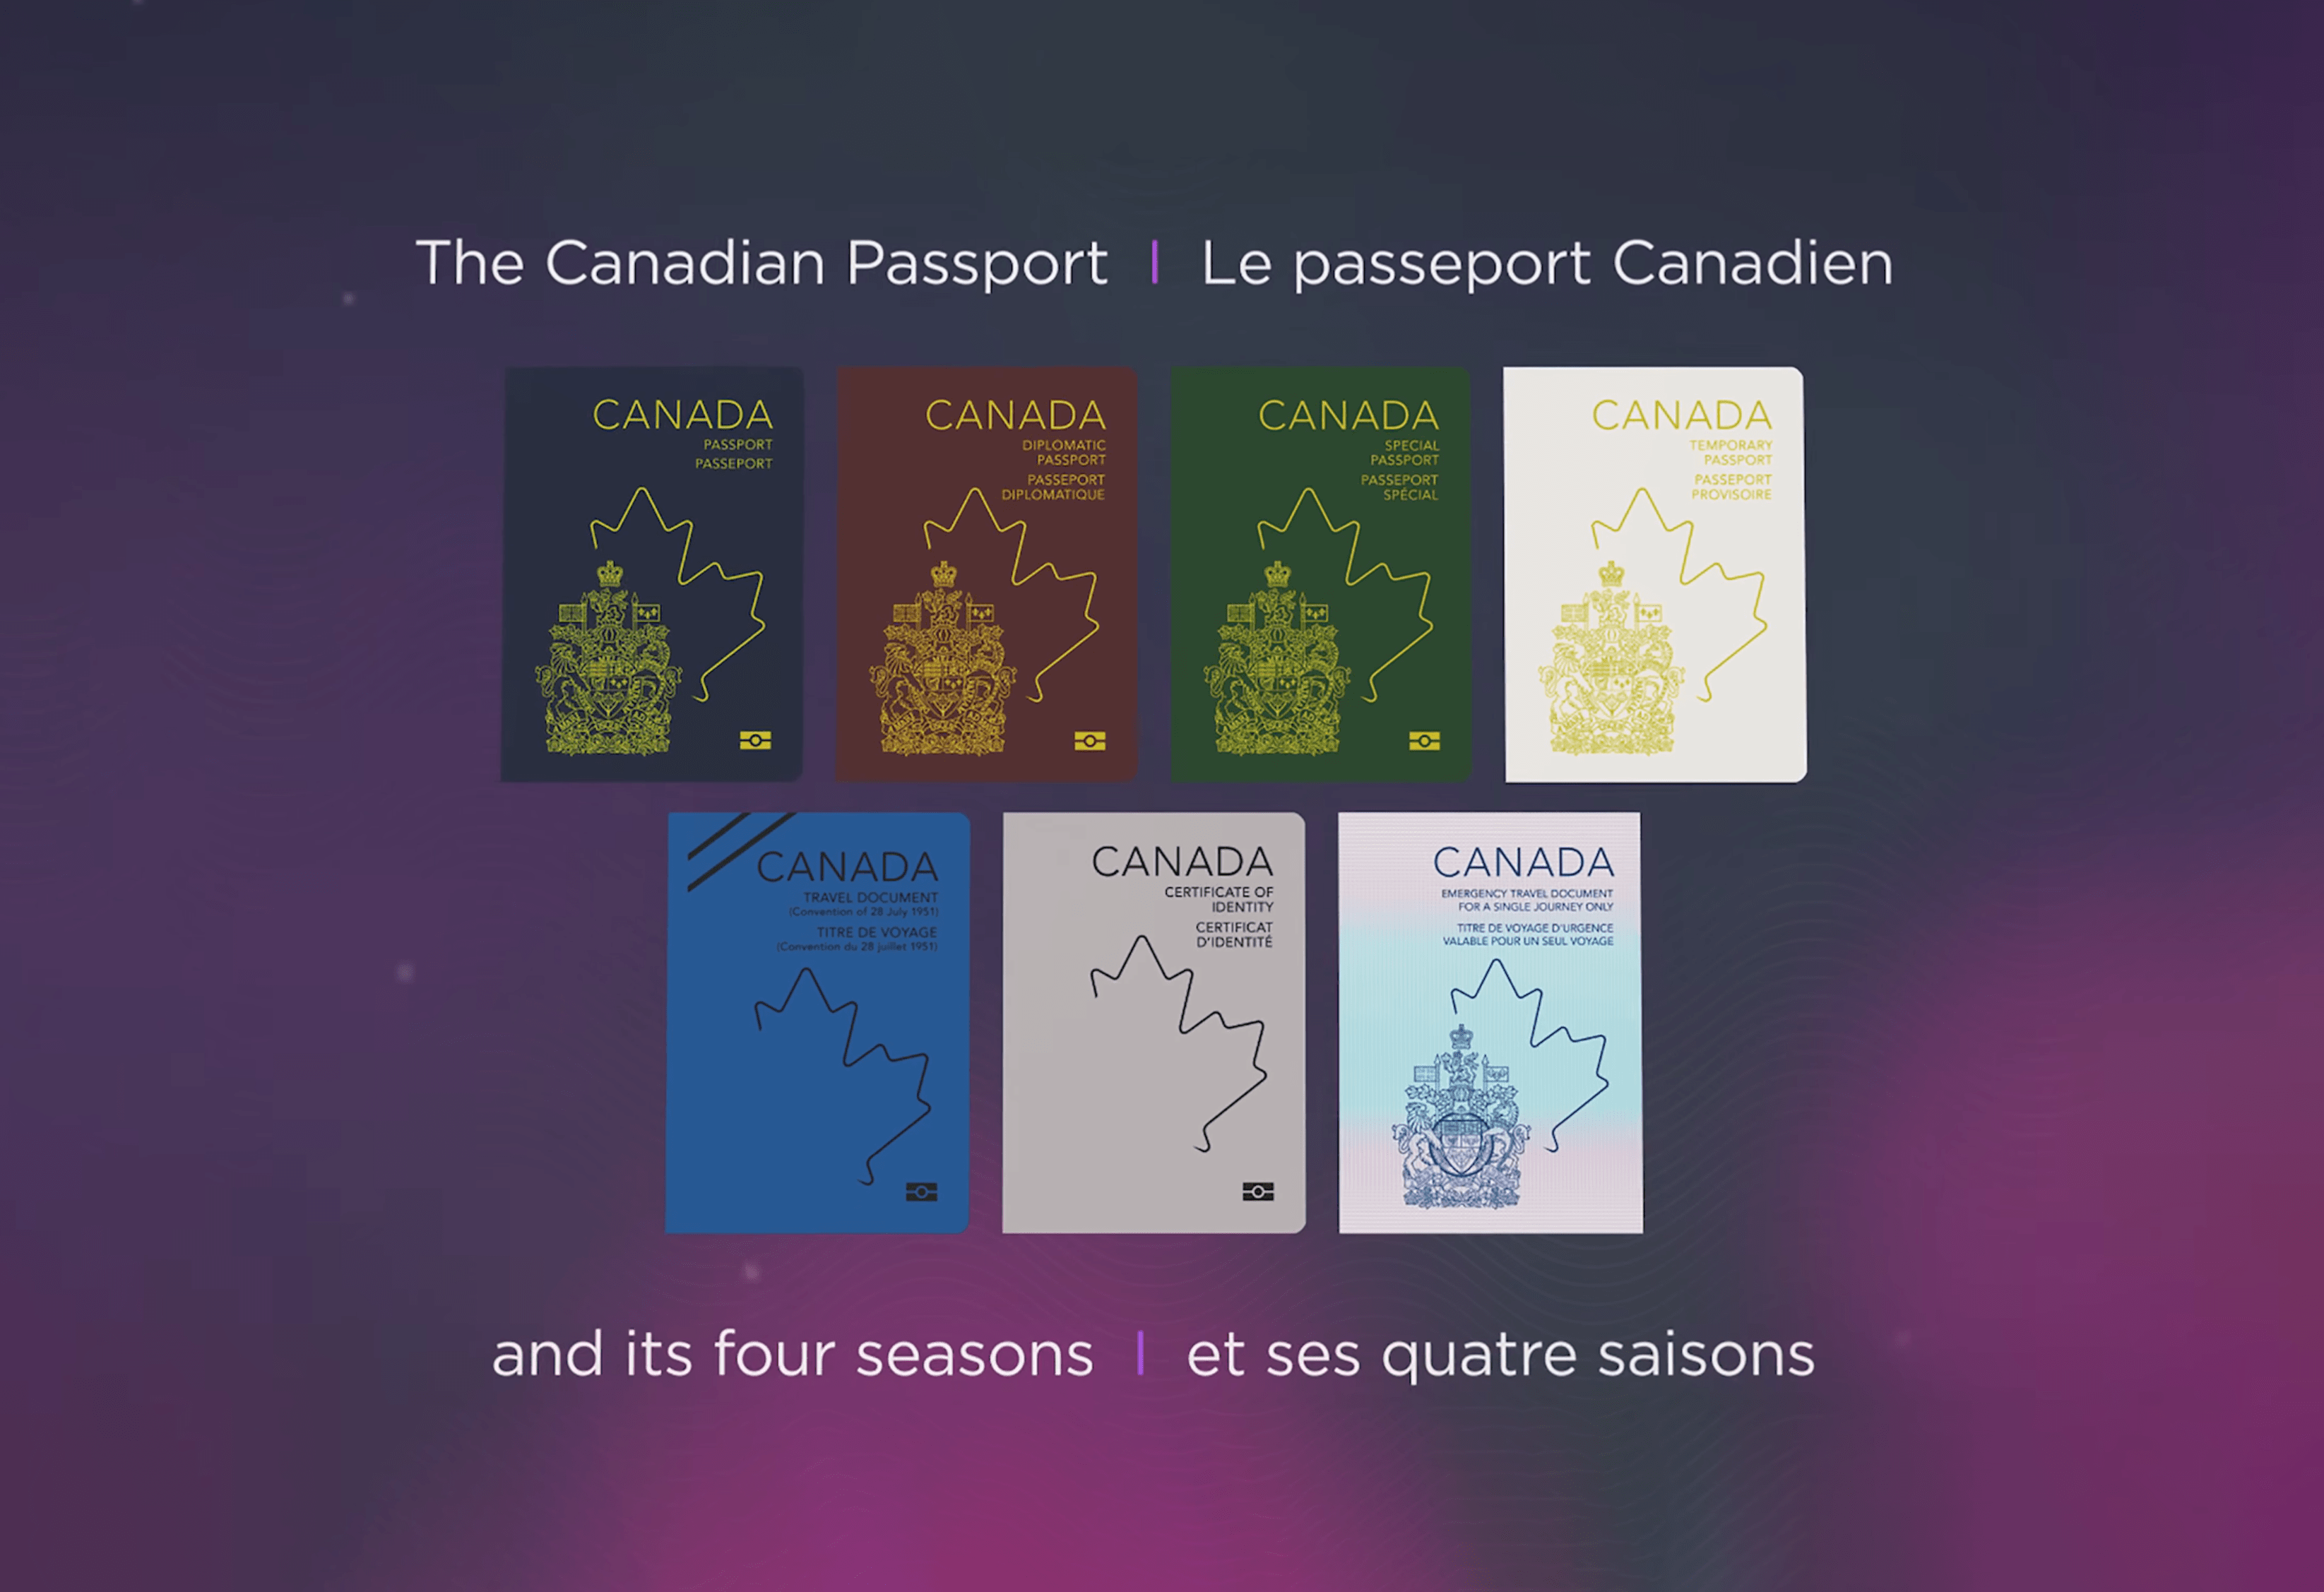 New Canadian Passport Unveiled with Enhanced Security Features and Design